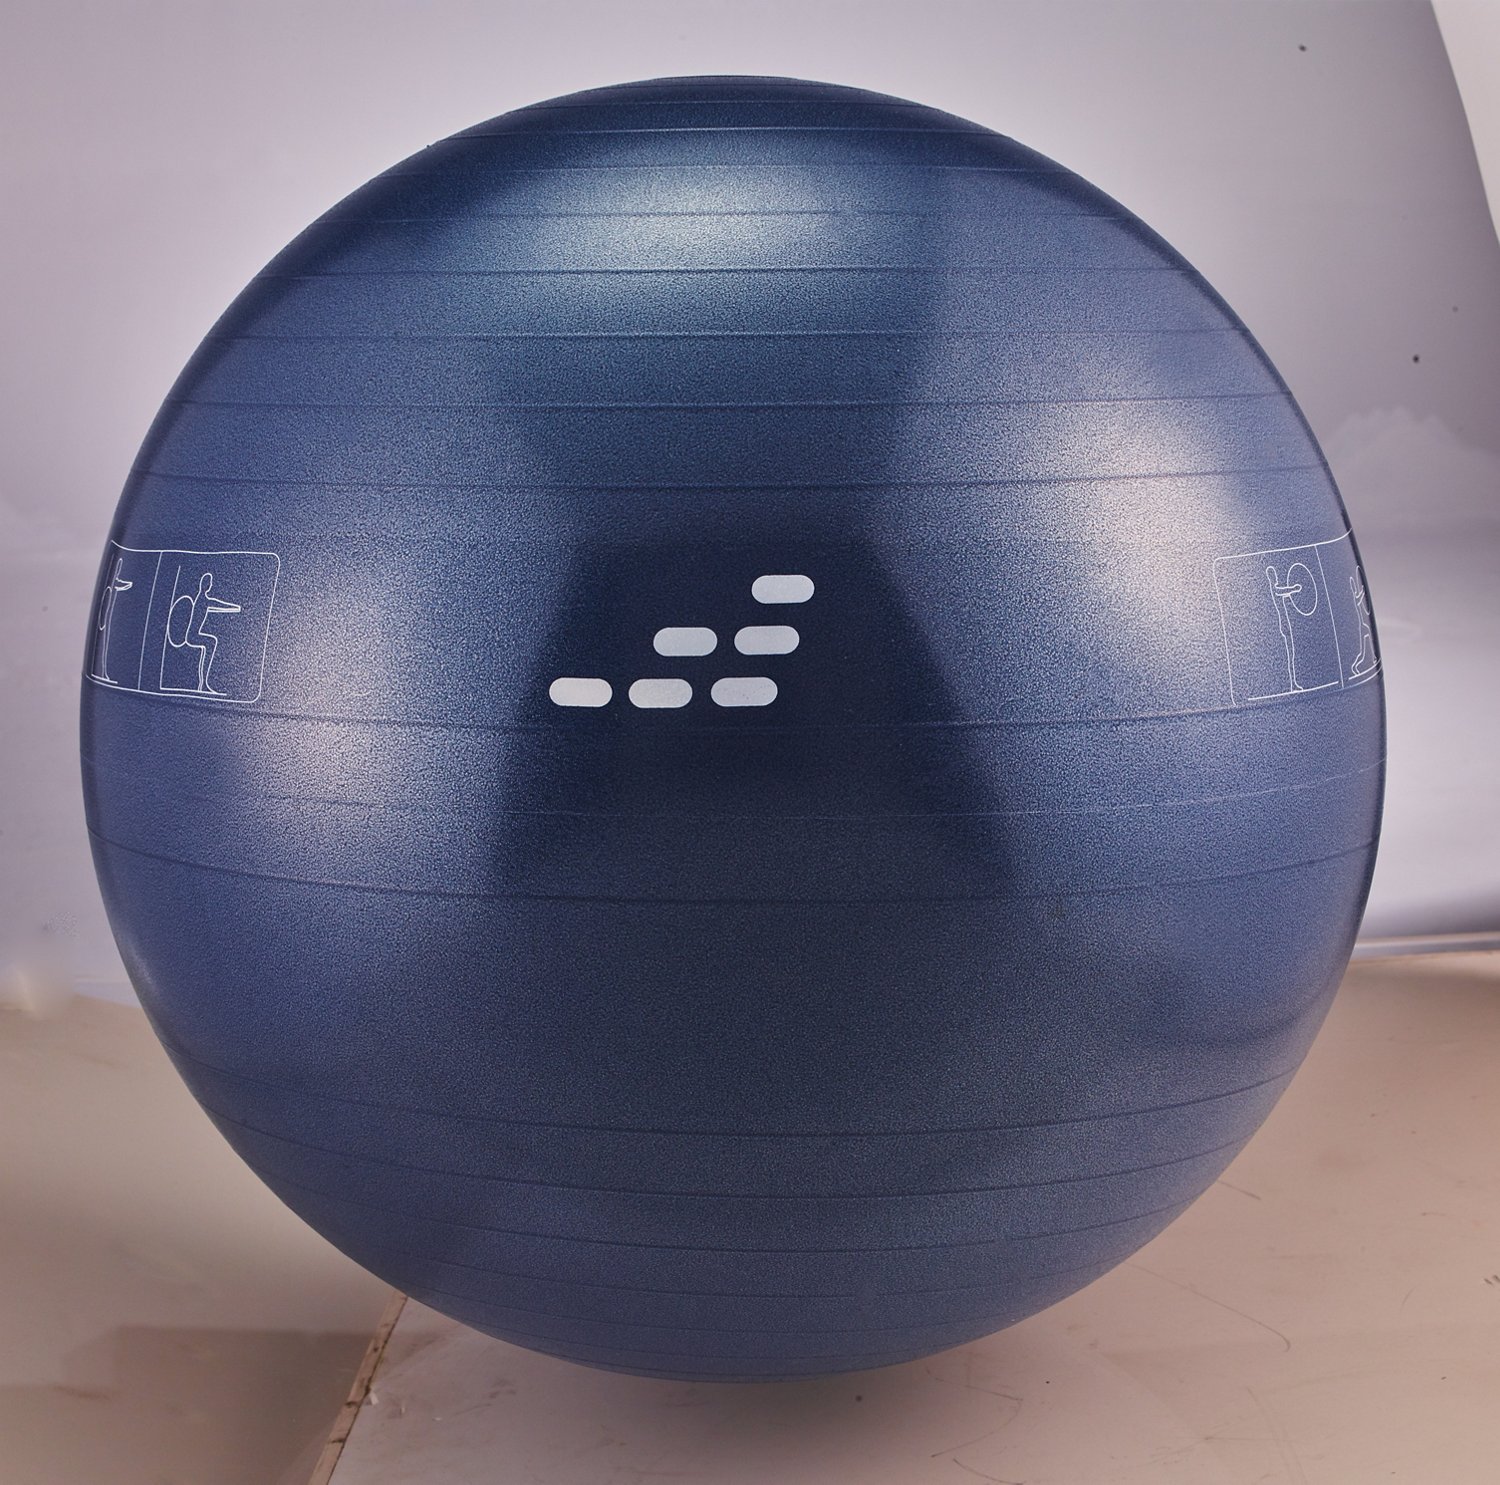 bcg stability ball